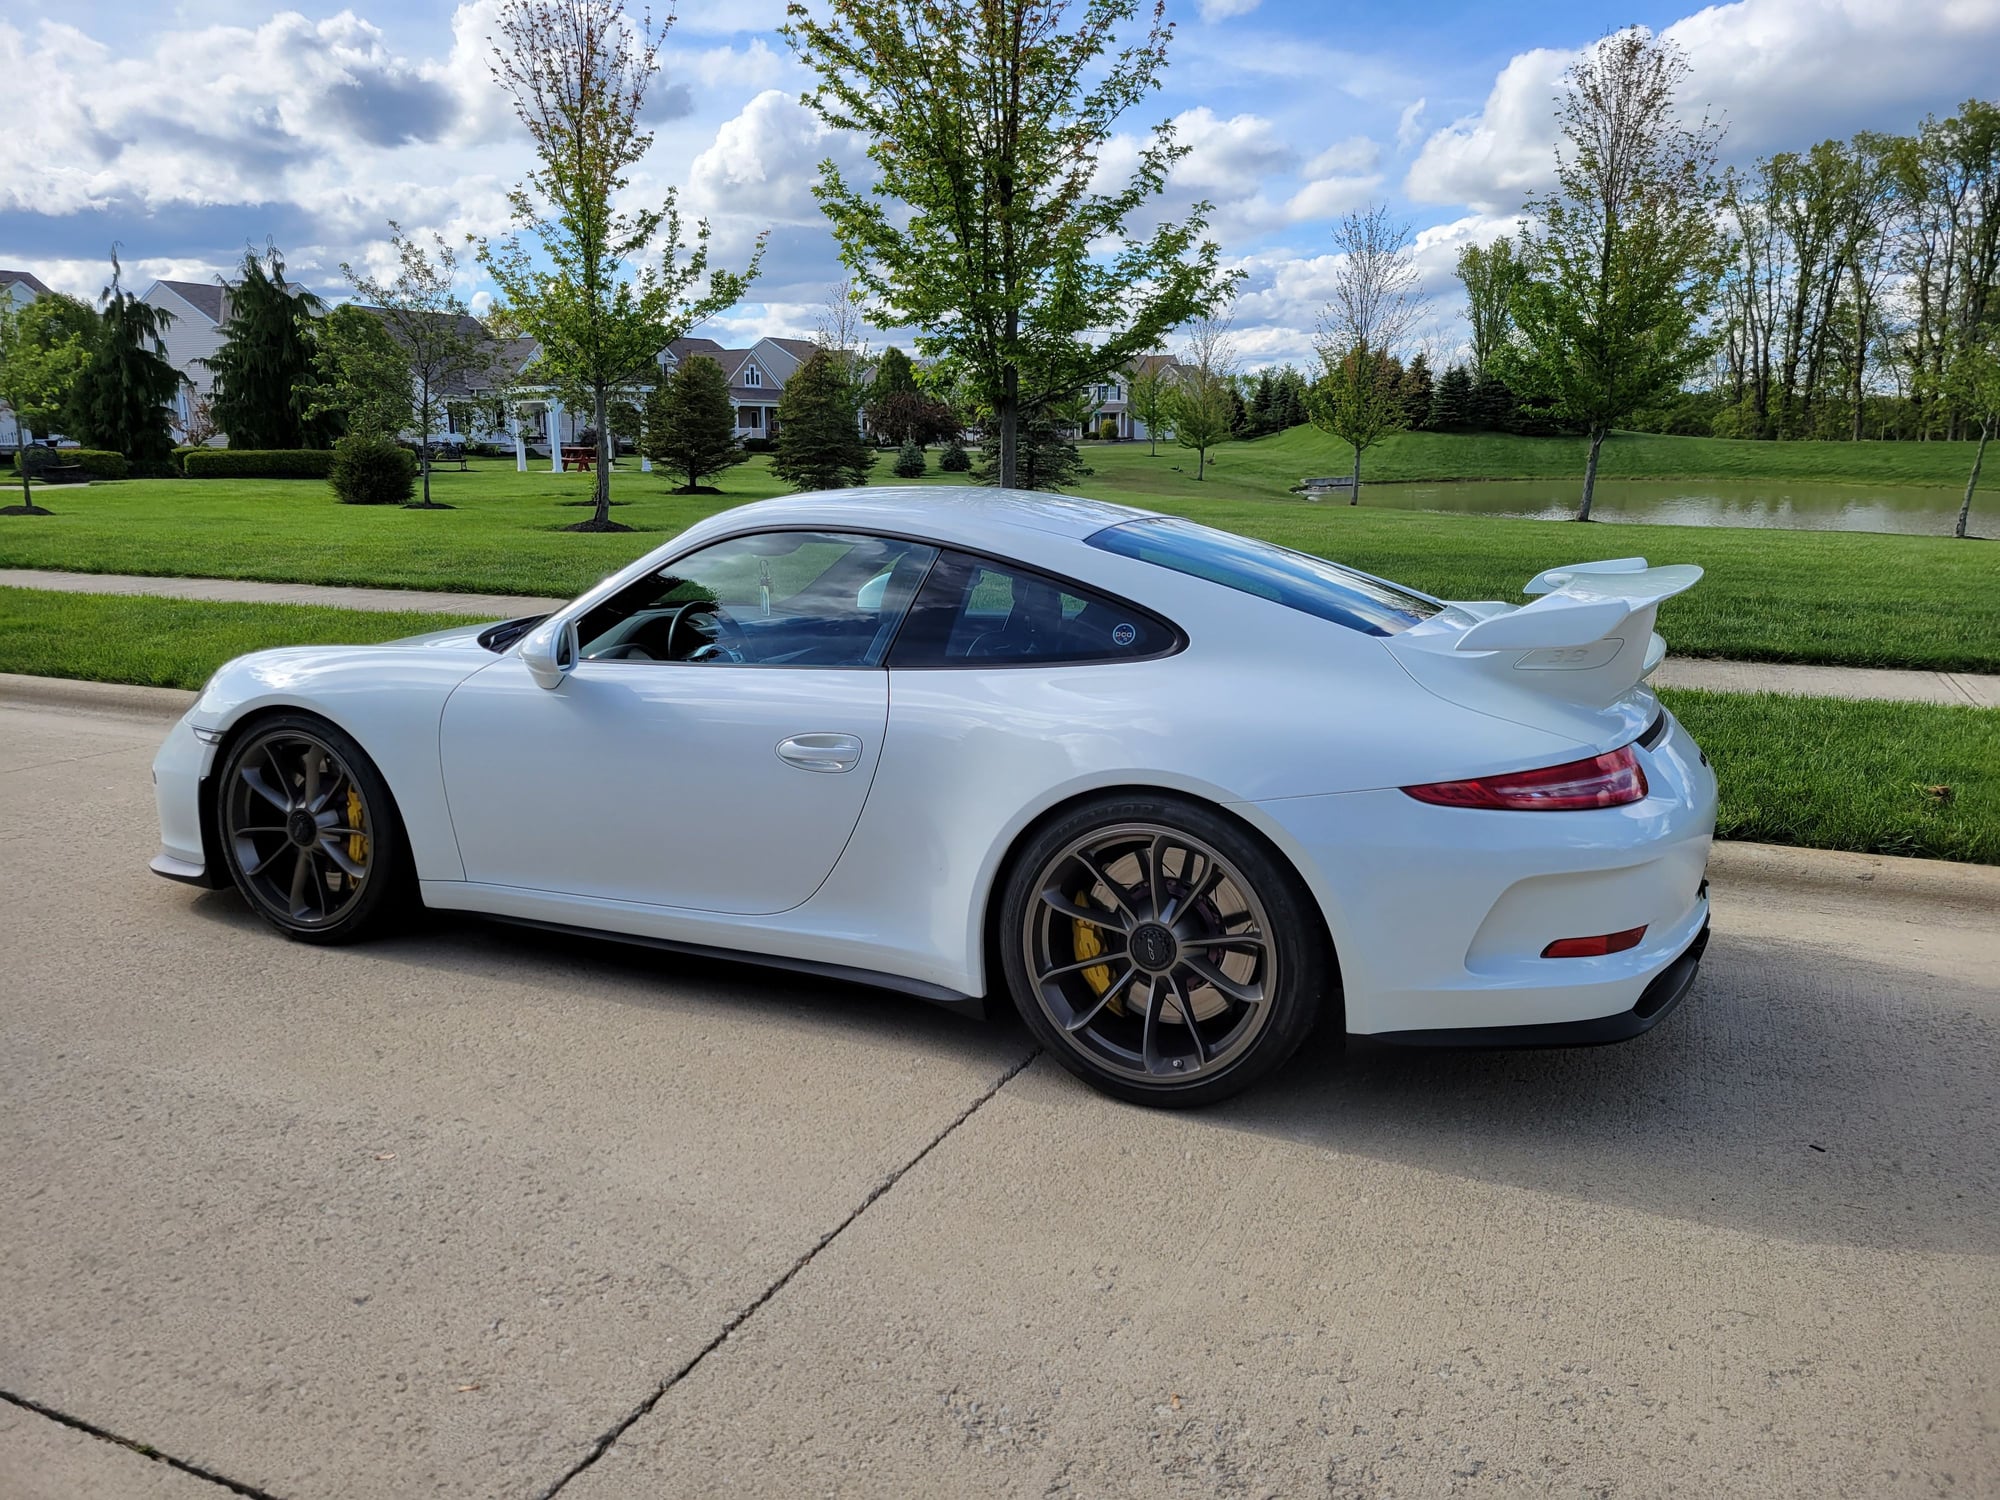 2015 Porsche GT3 - 2015 911 GT3 LWB, FAL, Leather Interior - Used - VIN WP0AC2A95FS184126 - 31,750 Miles - 6 cyl - 2WD - Automatic - Coupe - White - Columbus, OH 43017, United States